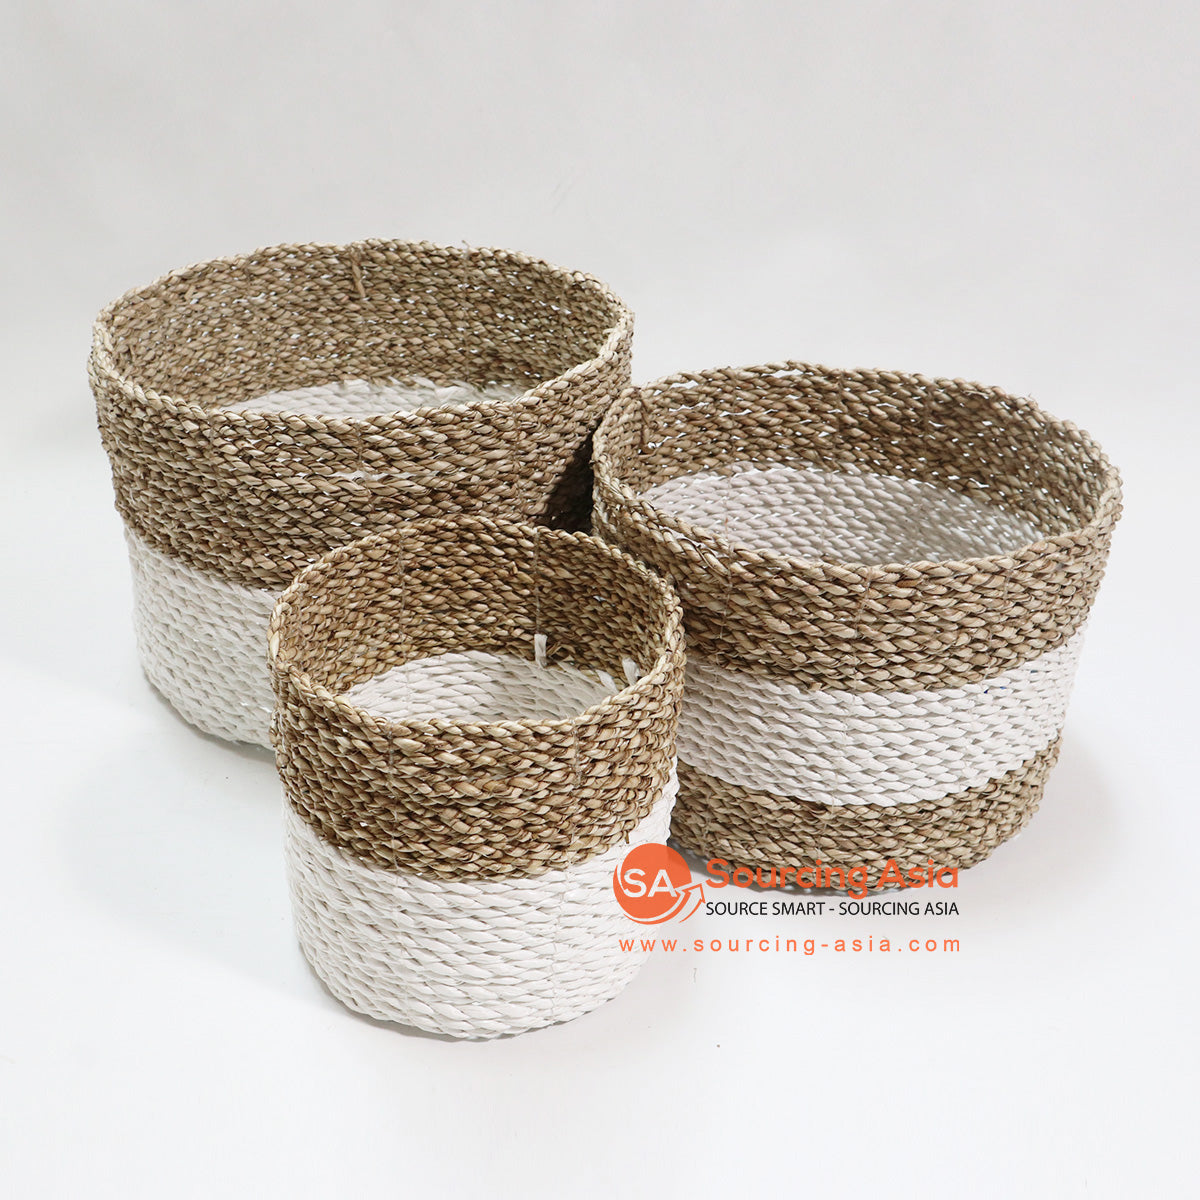 HBSC049-3 SET OF THREE NATURAL AND WHITE SEAGRASS MINI POT BASKETS